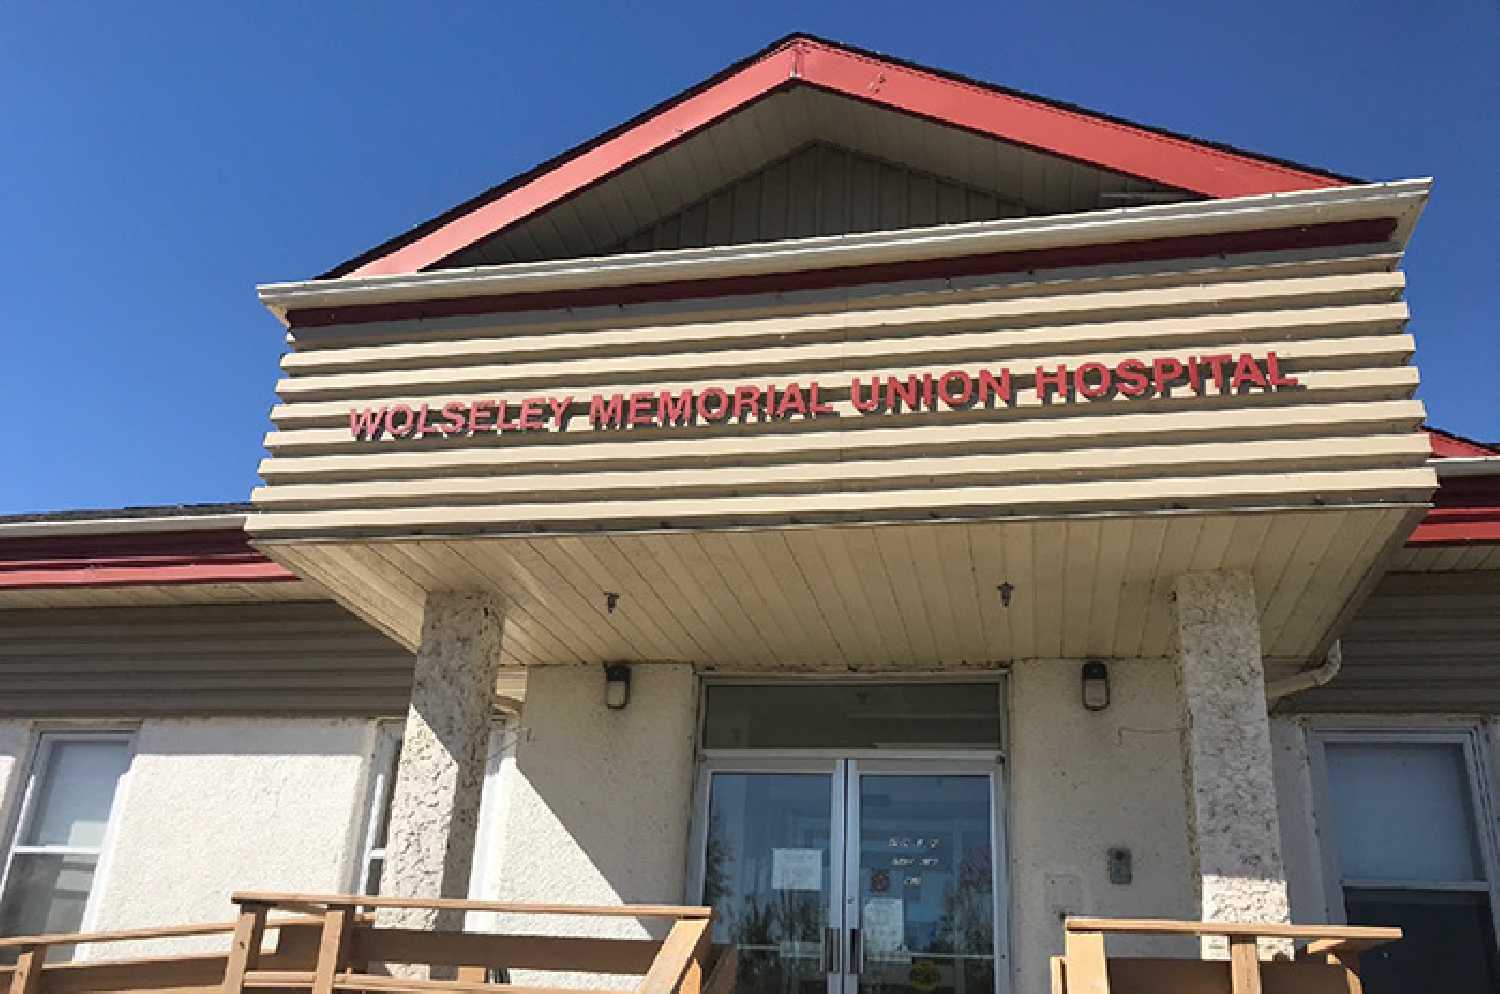 “We are really pleased to tell the people of Wolseley and area that we have successfully recruited two Registered Nurses (RNs),” said Dan Drummond, Director, of Primary Care (Southeast), Saskatchewan Health Authority.